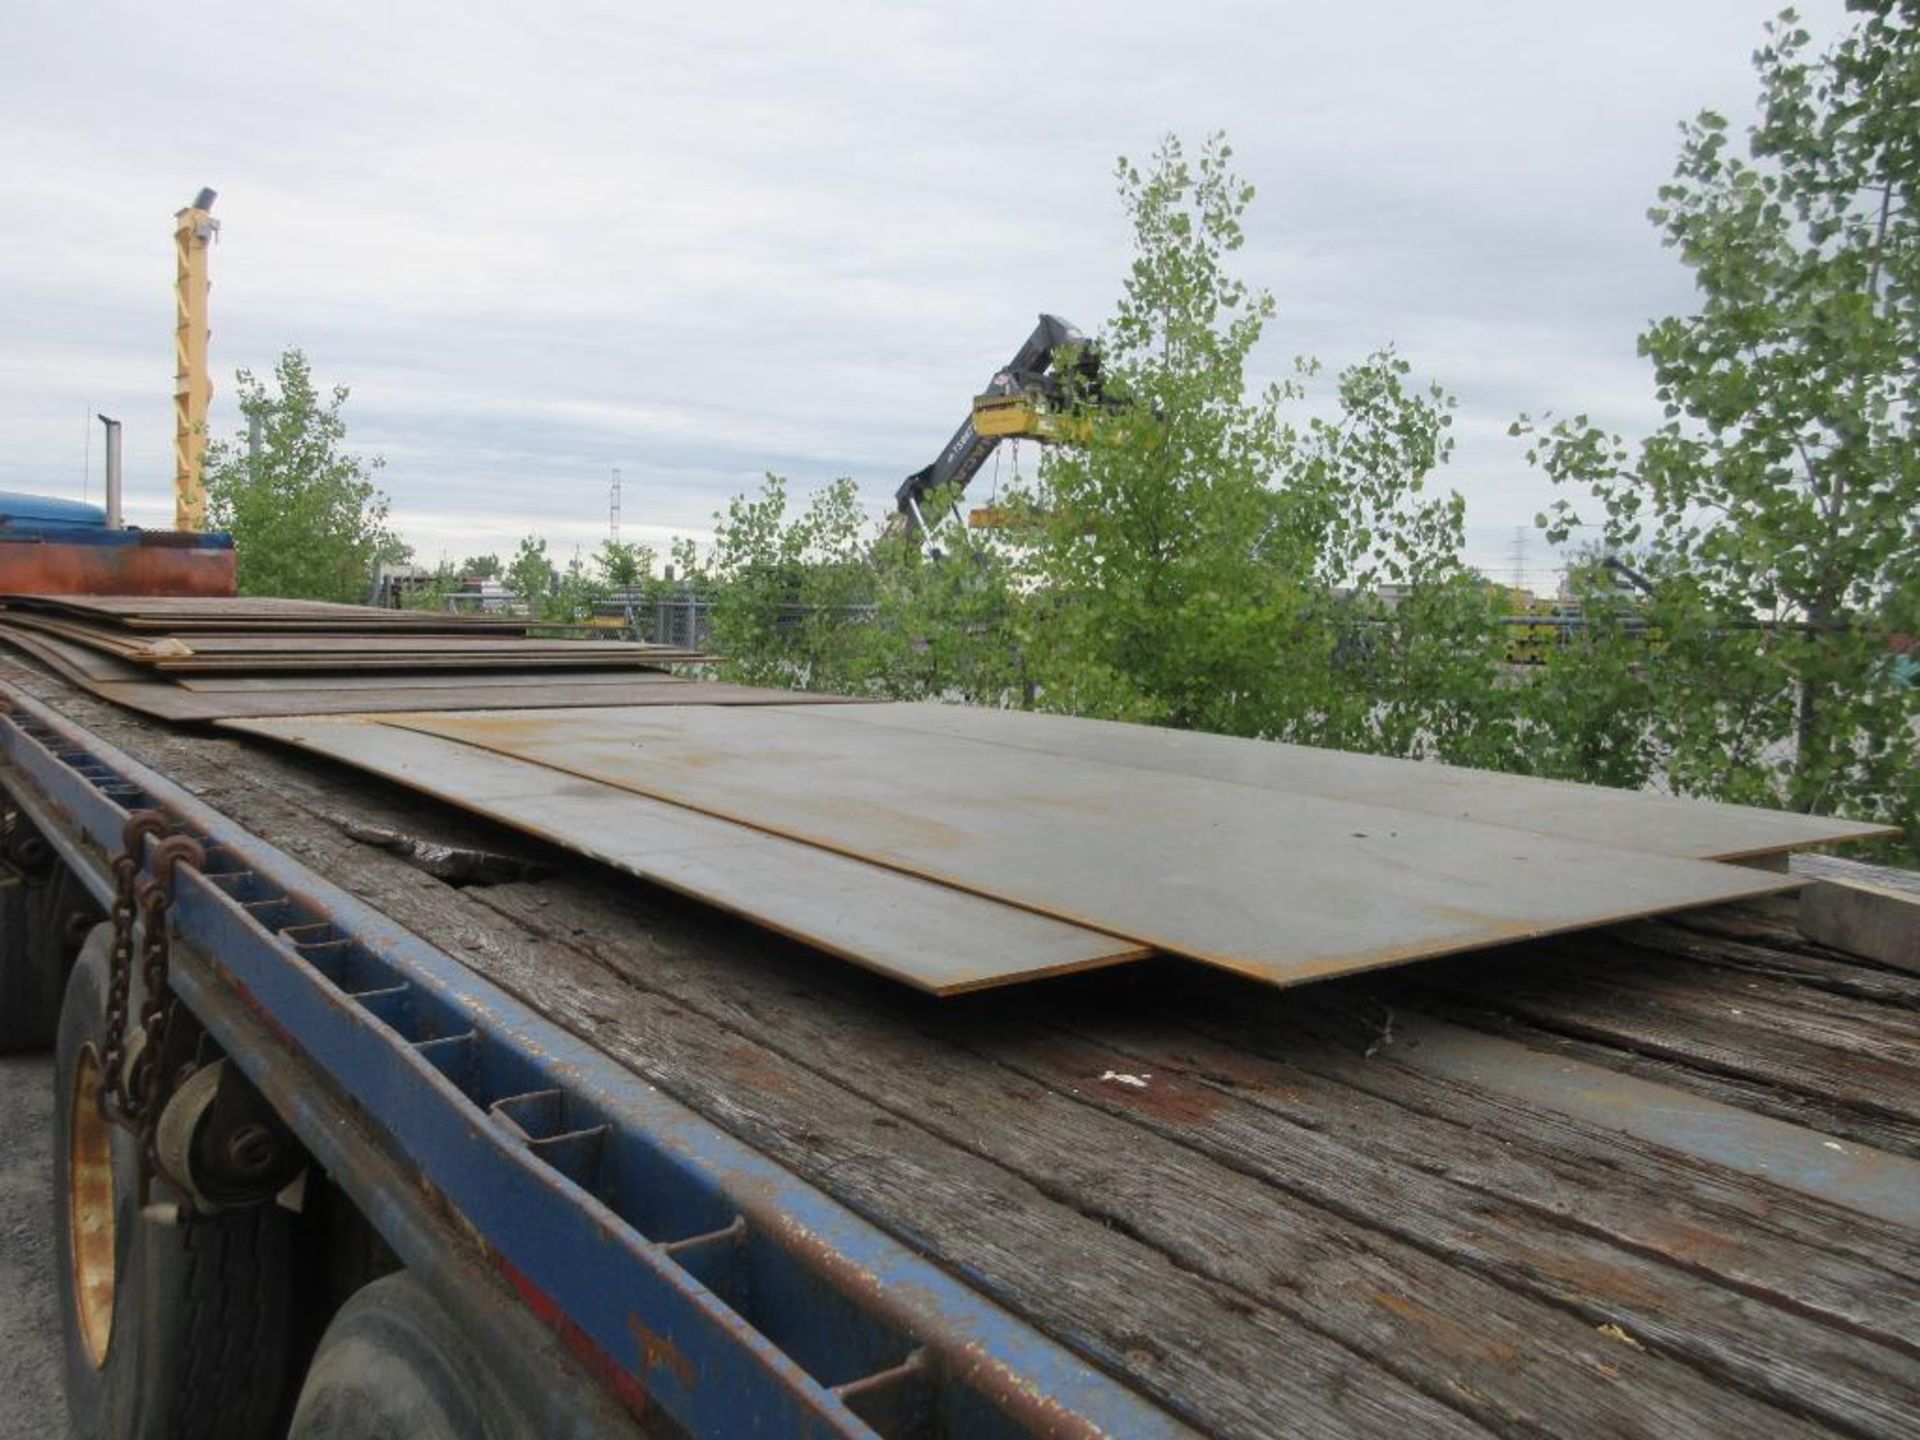 LOT OF 27 SHEETS OF PLATE STEEL ON TRAILER (NO TRAILER), TOTAL WEIGHT 293,559 LBS, SIZES PER PHOTO ( - Image 11 of 14